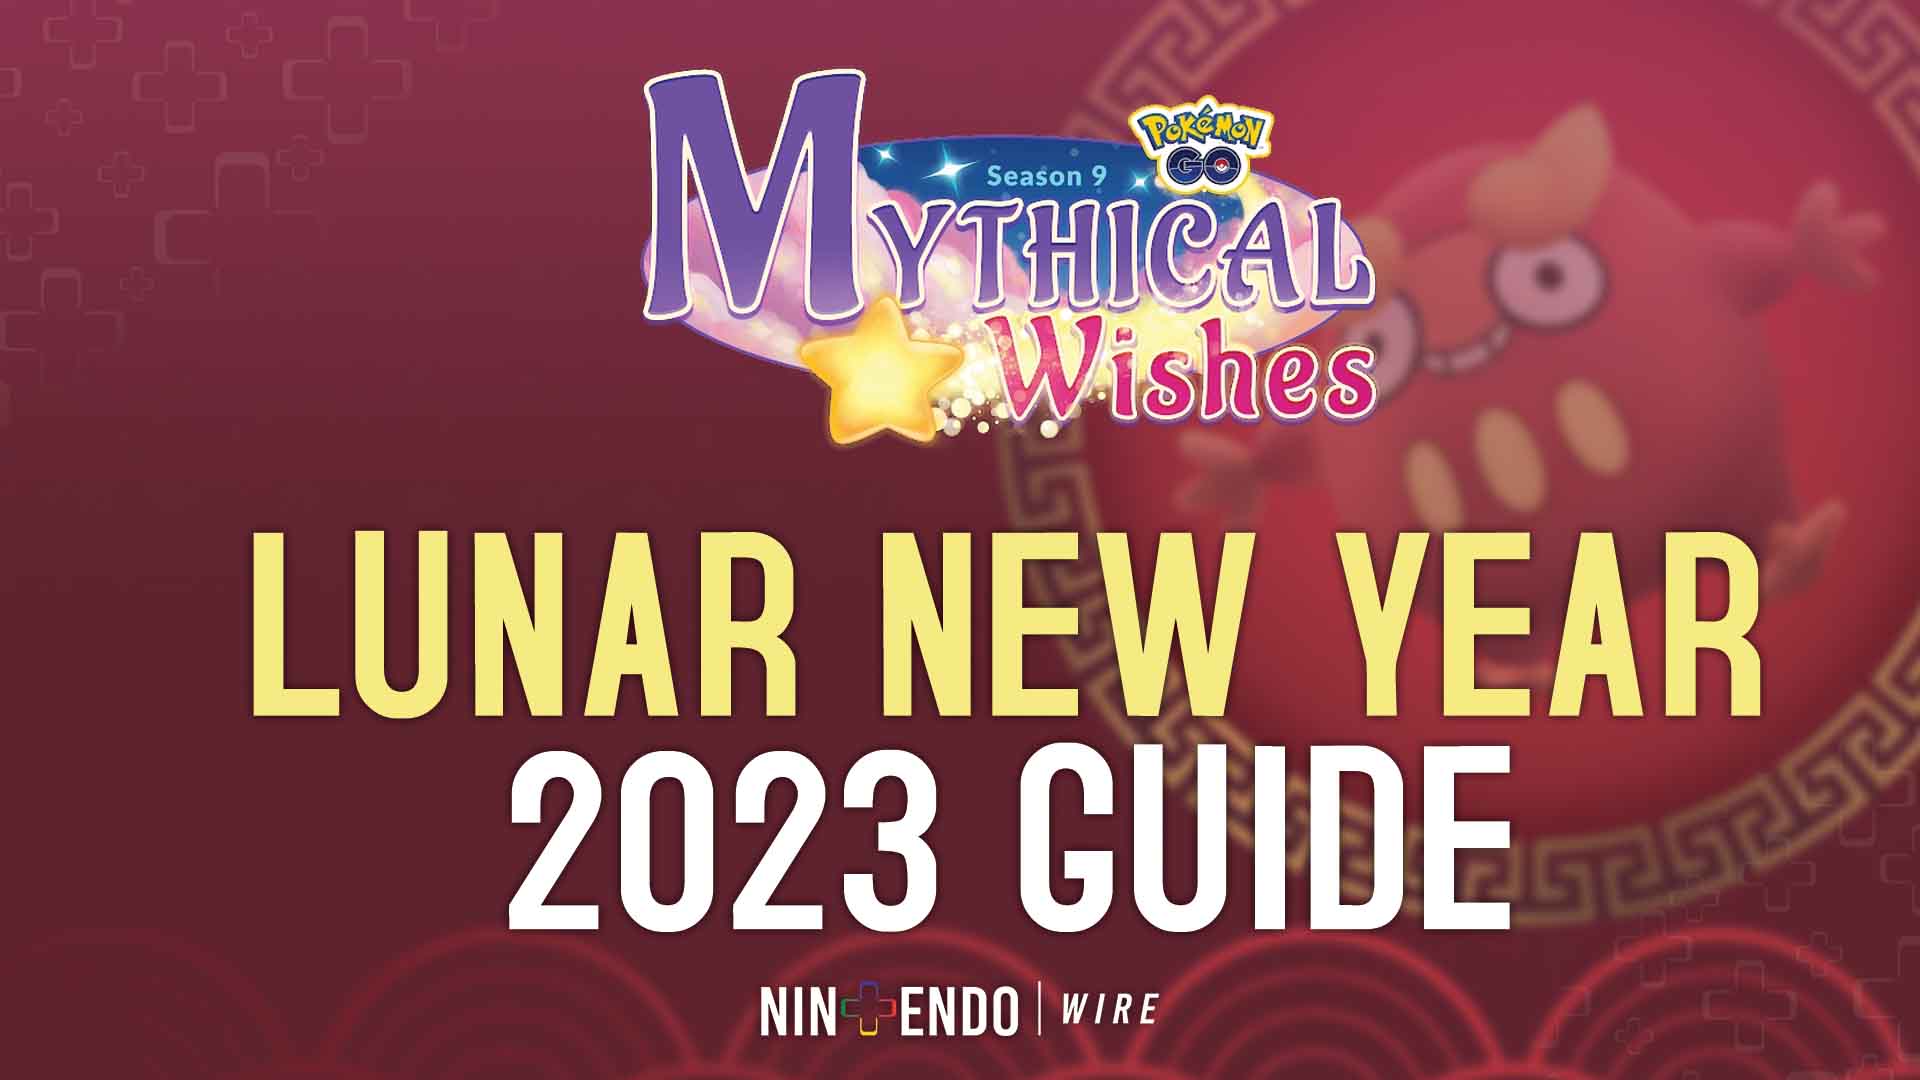 Celebrate the Lunar New Year with Pokémon GO's 2023 Lunar New Year event!